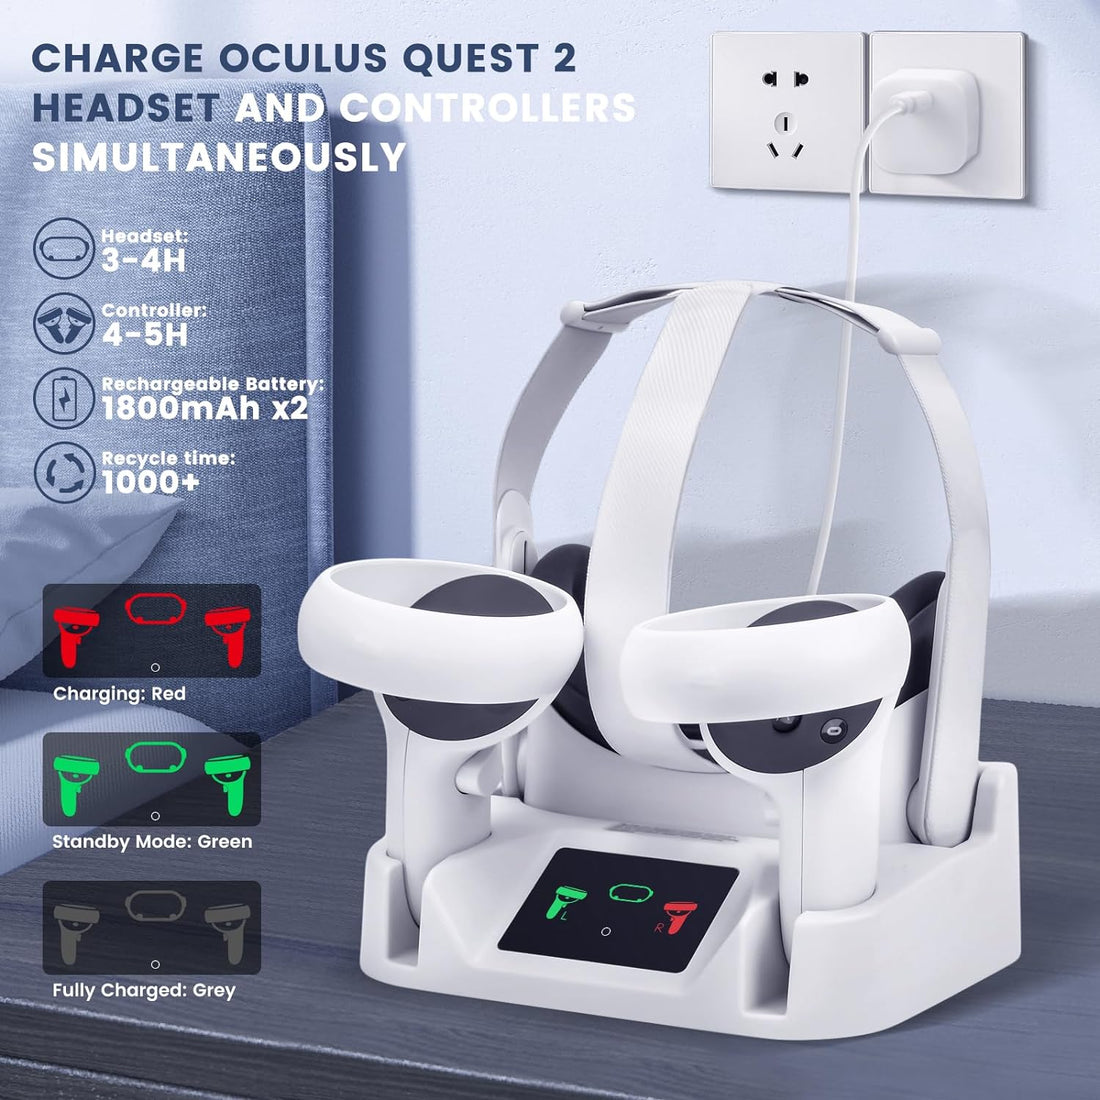 Charging Dock for Oculus Quest 2,Magnetic Charging Station for Meta Quest 2 VR Headset & Controllers with 2 Rechargeable Batteries,USB-C Charger and LED Display,Support Elite Strap